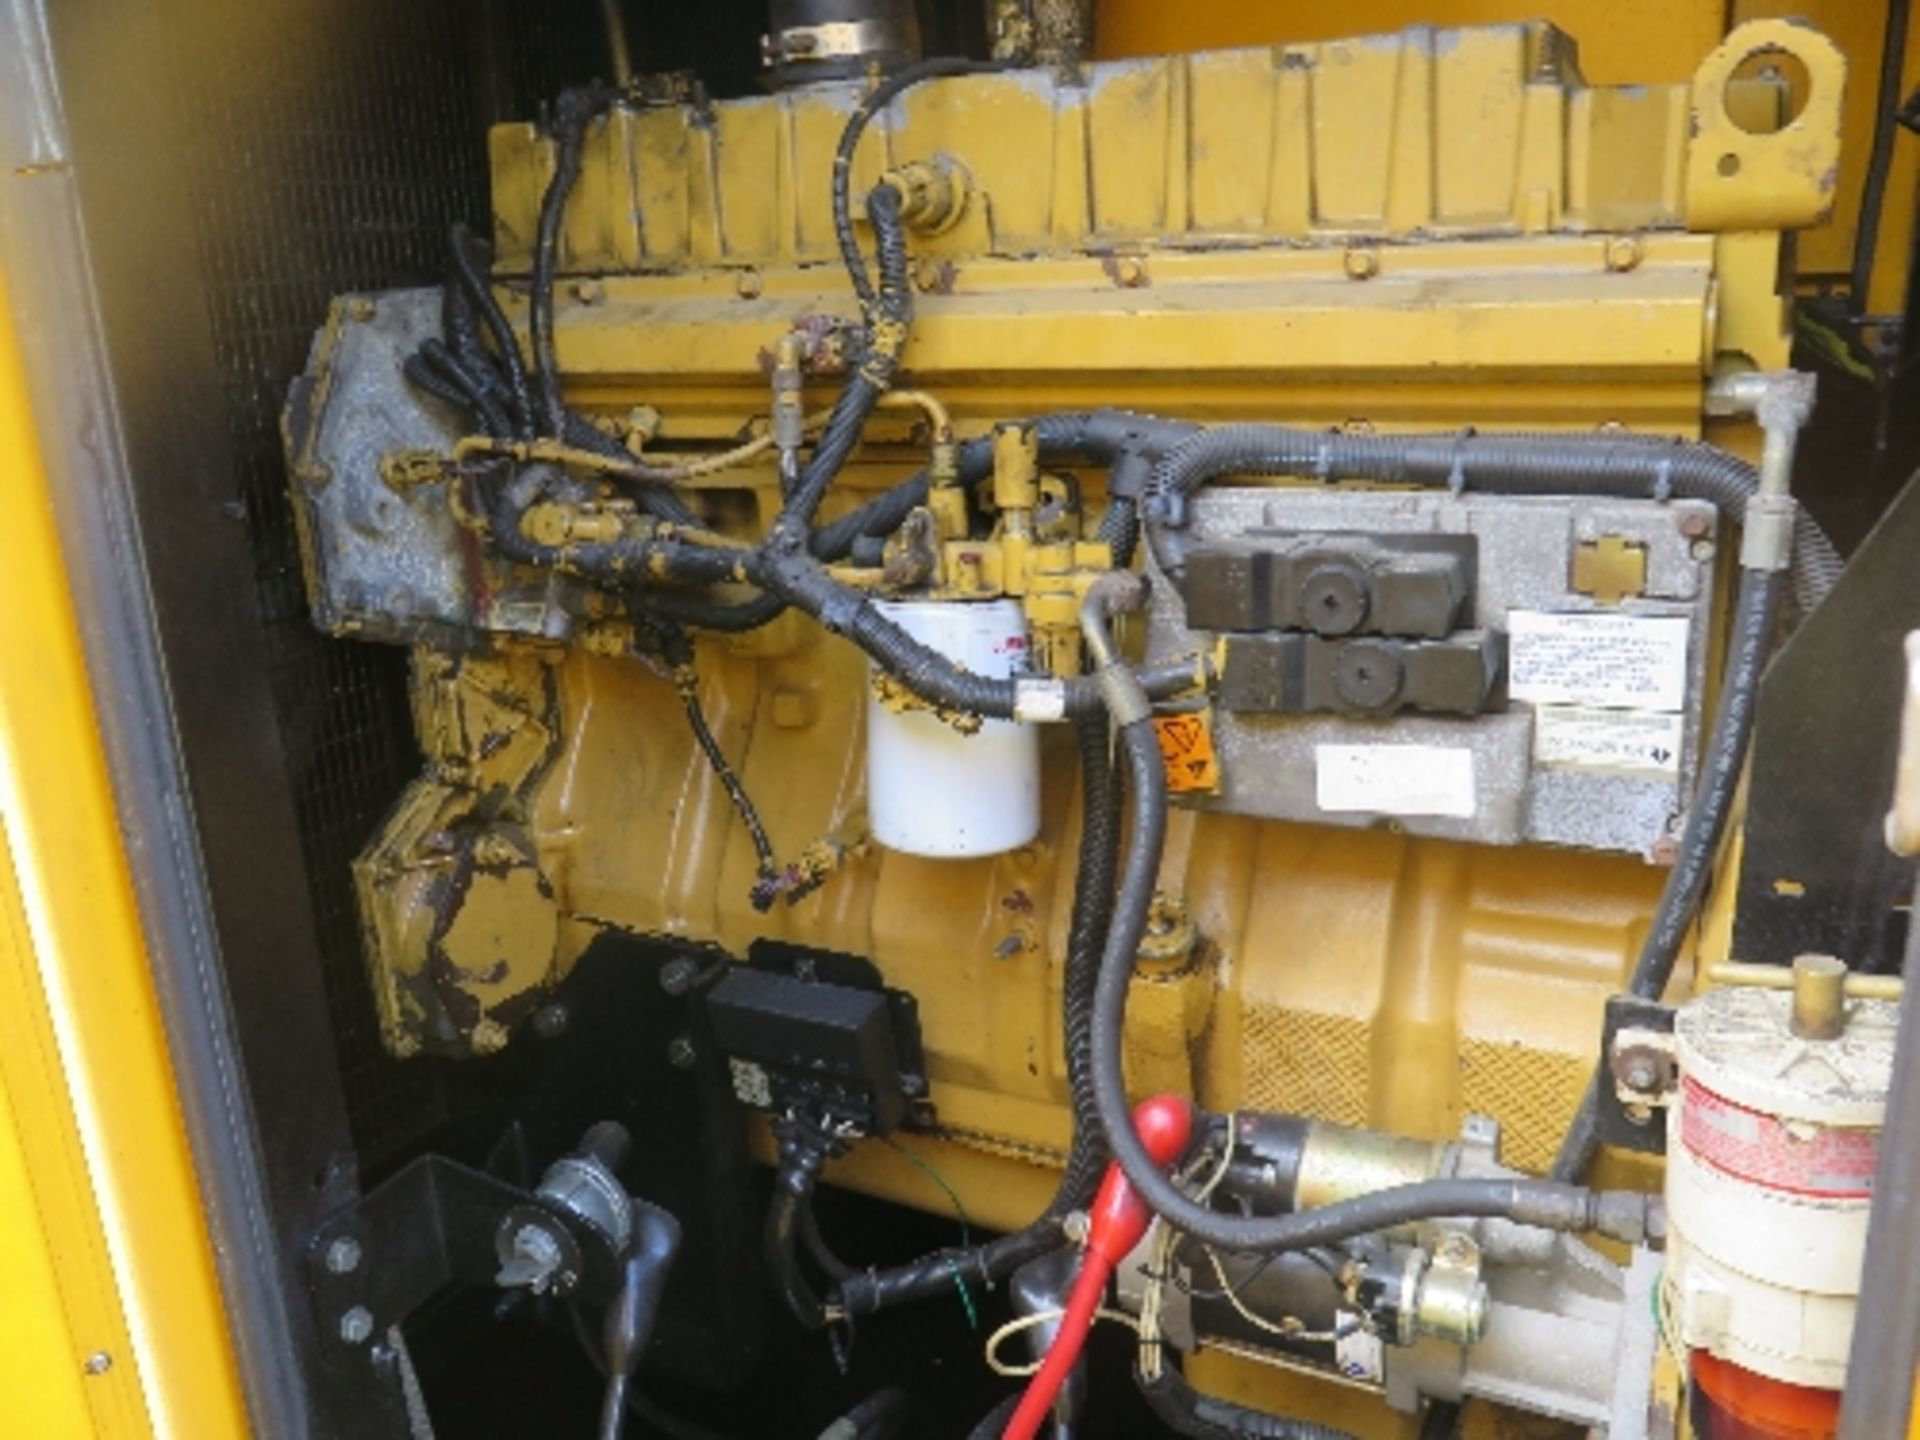 Caterpillar XQE200 generator 22896 hrs 157829
PERKINS - RUNS AND MAKES POWER
ALL LOTS are SOLD - Image 3 of 7